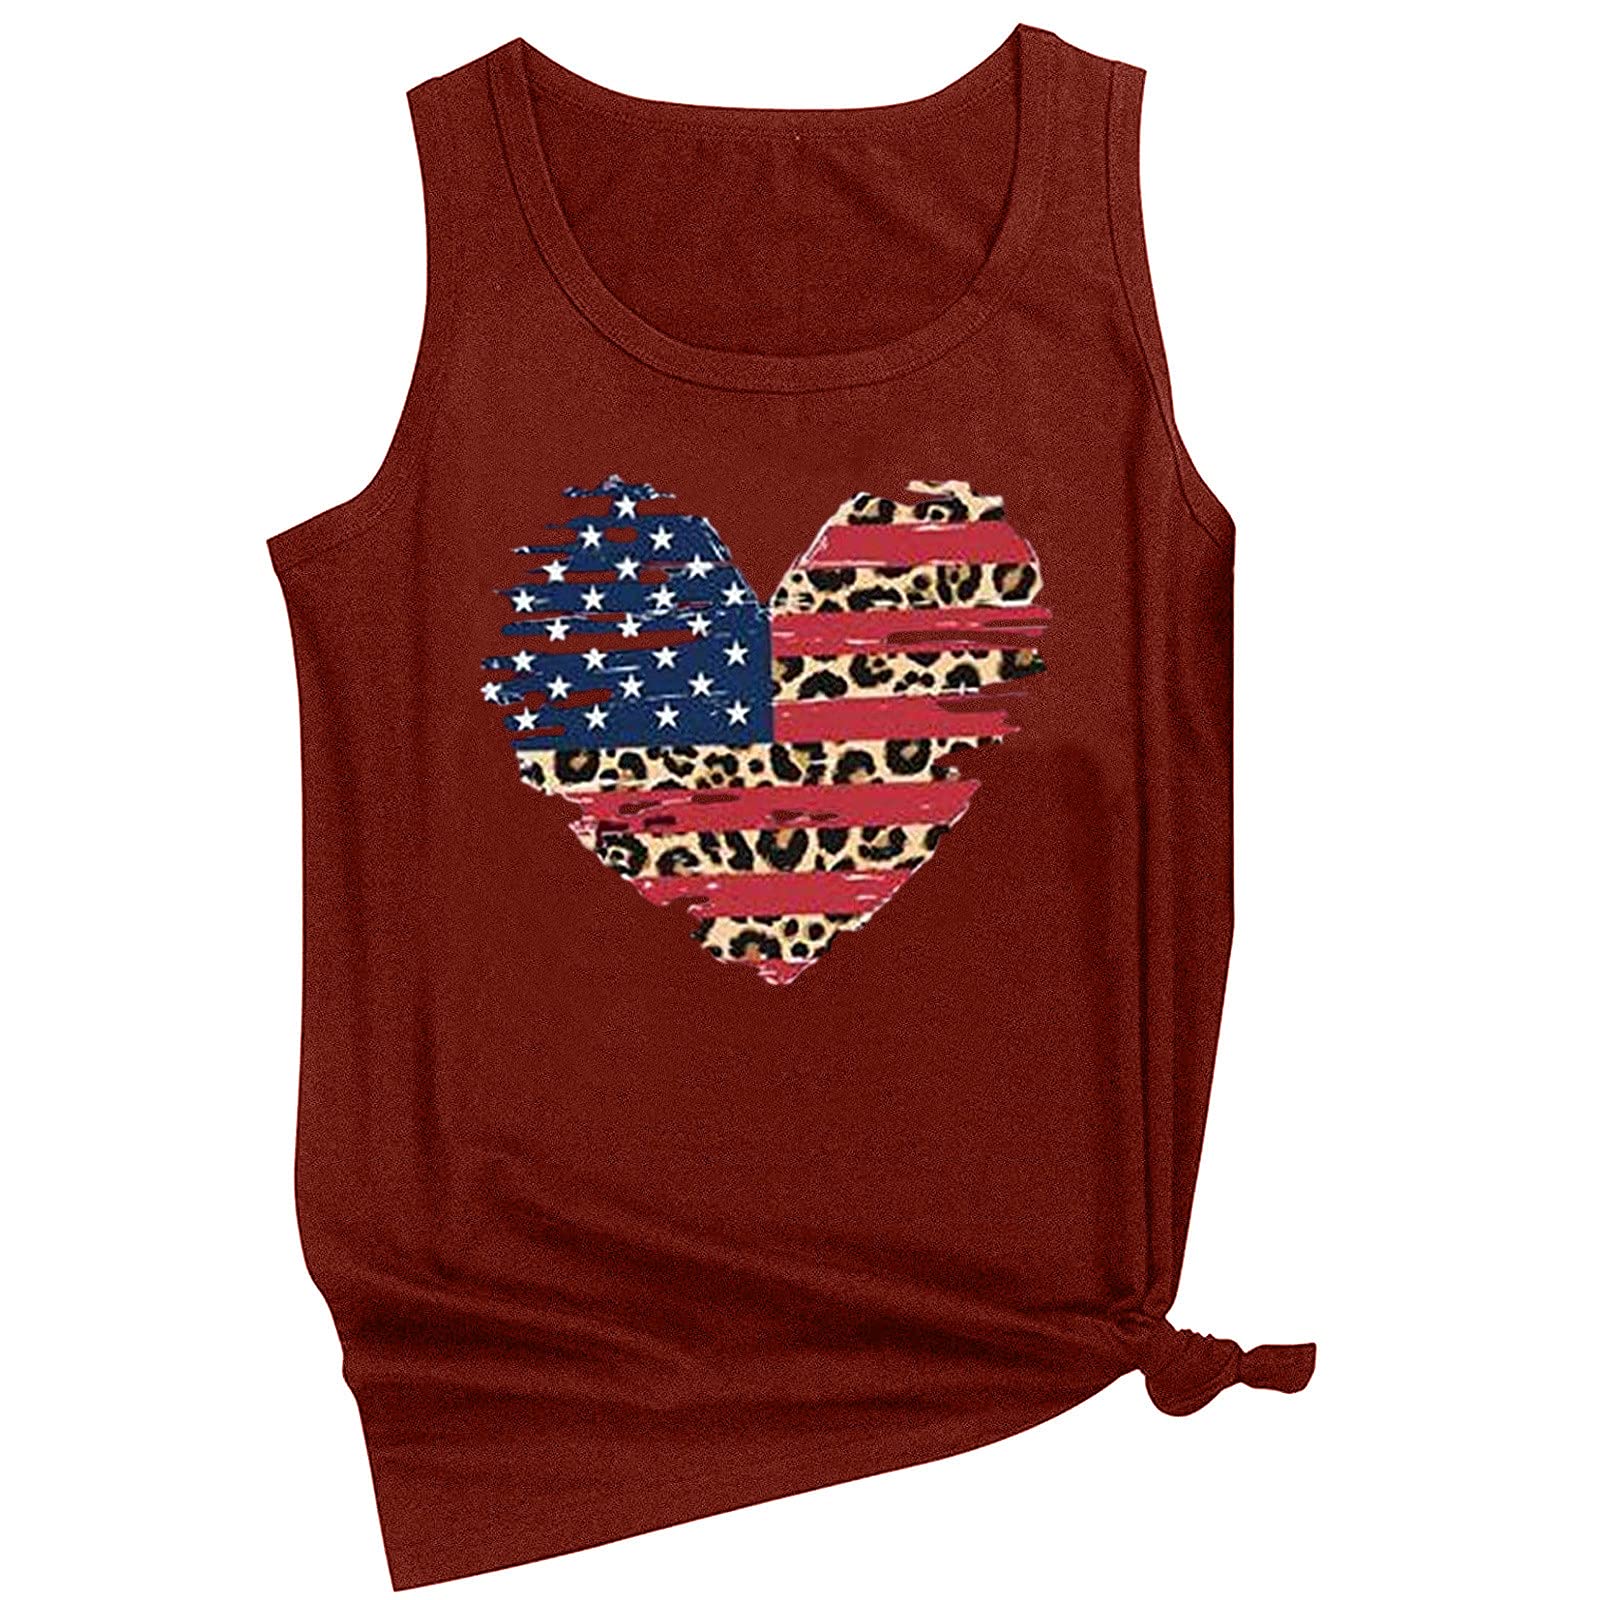 wodceeke Women American Flag Print Tank Tops Sleeveless Loose T-shirt Independence Day Blouse Tops (Wine, M)